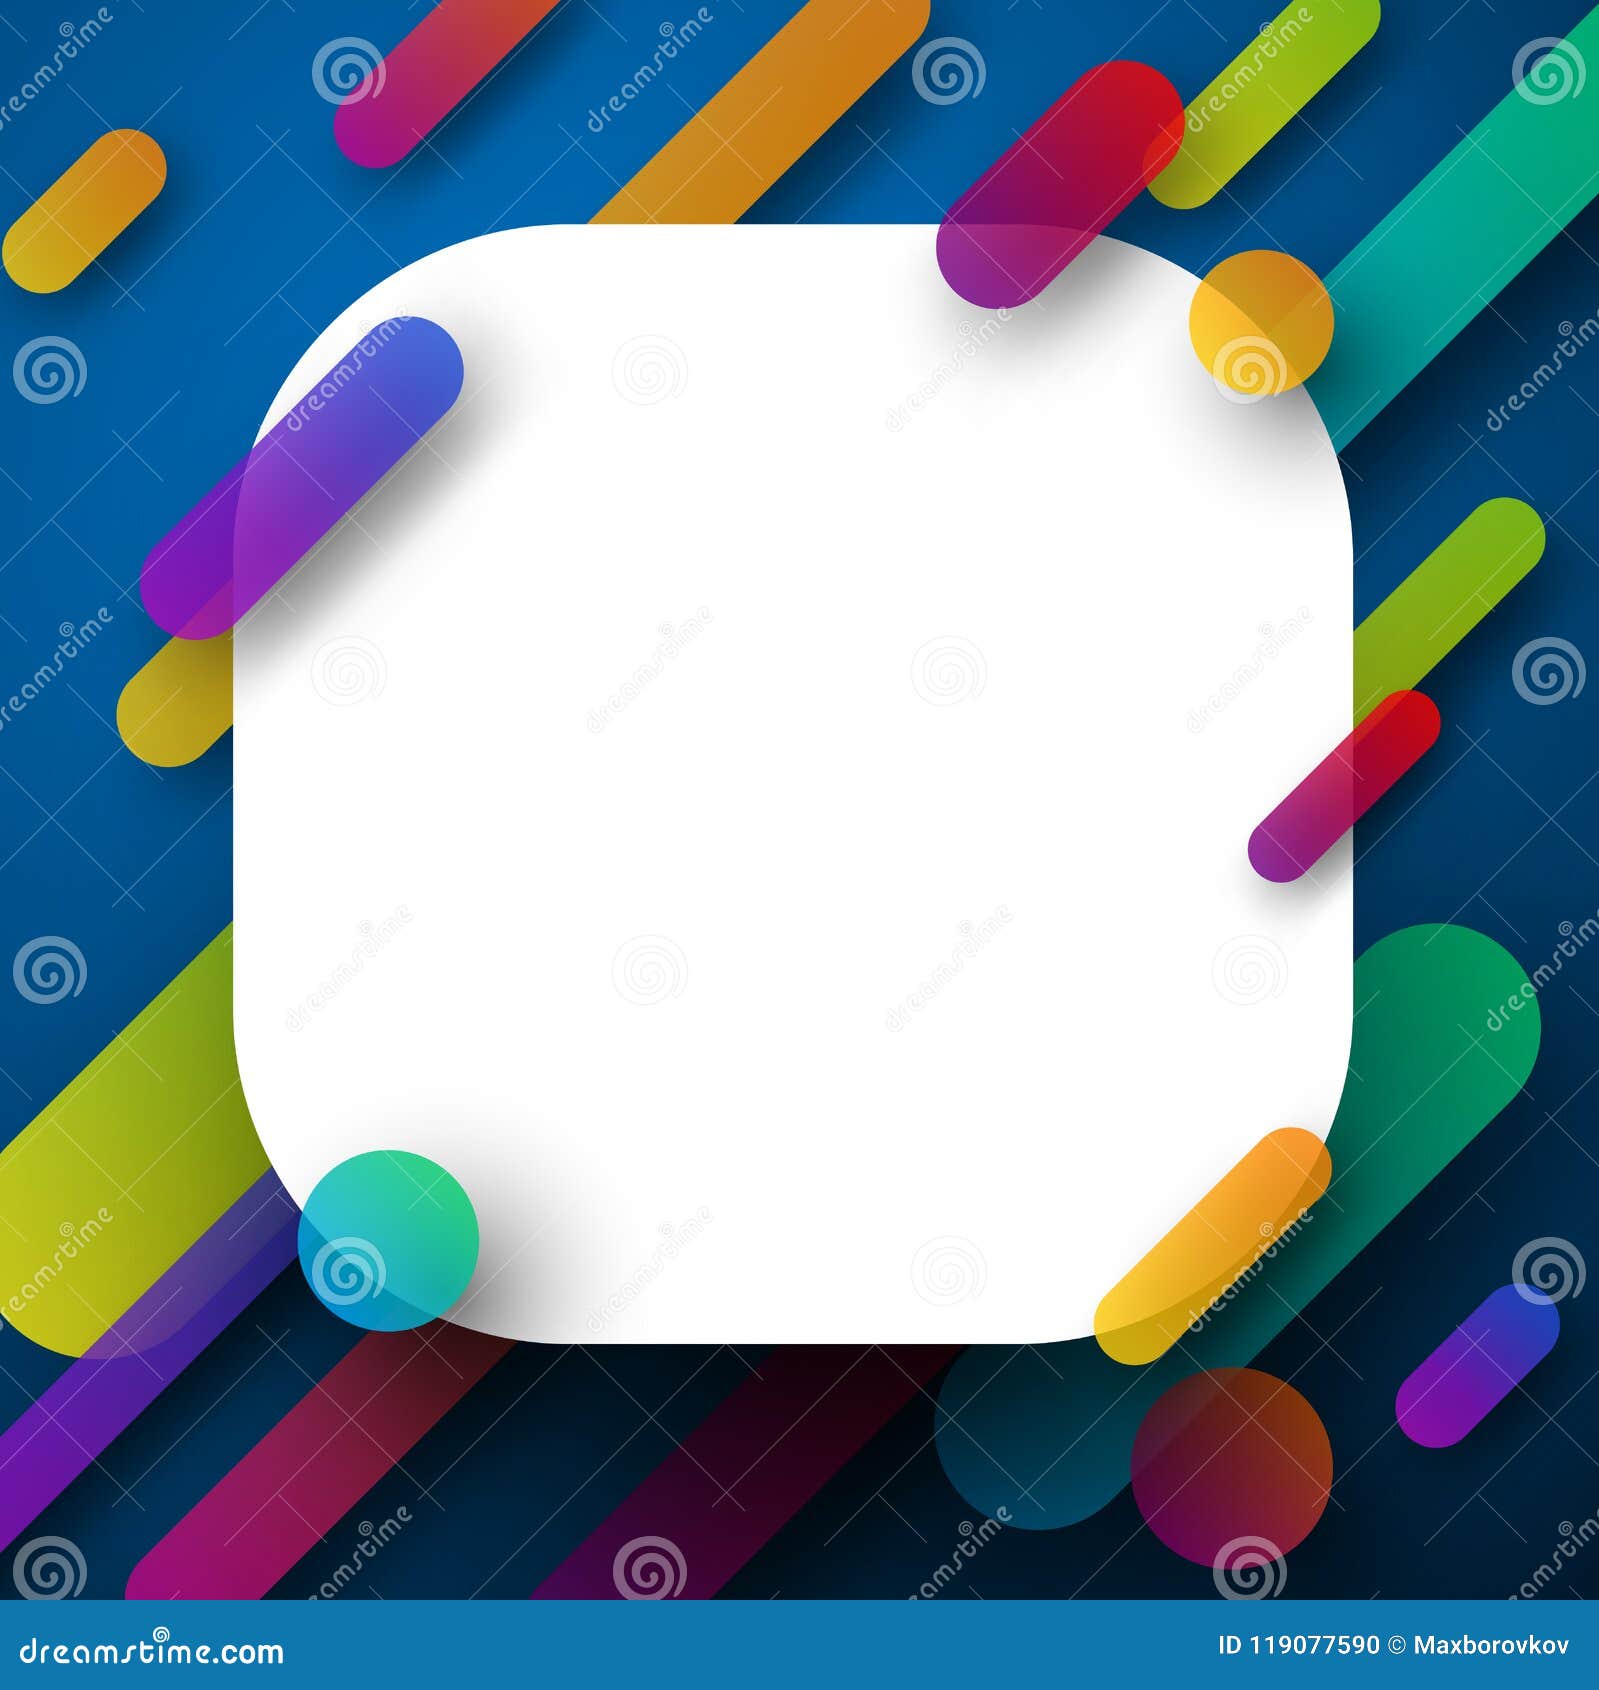 Colorful Rounded Background on Blue. Stock Vector - Illustration of ...